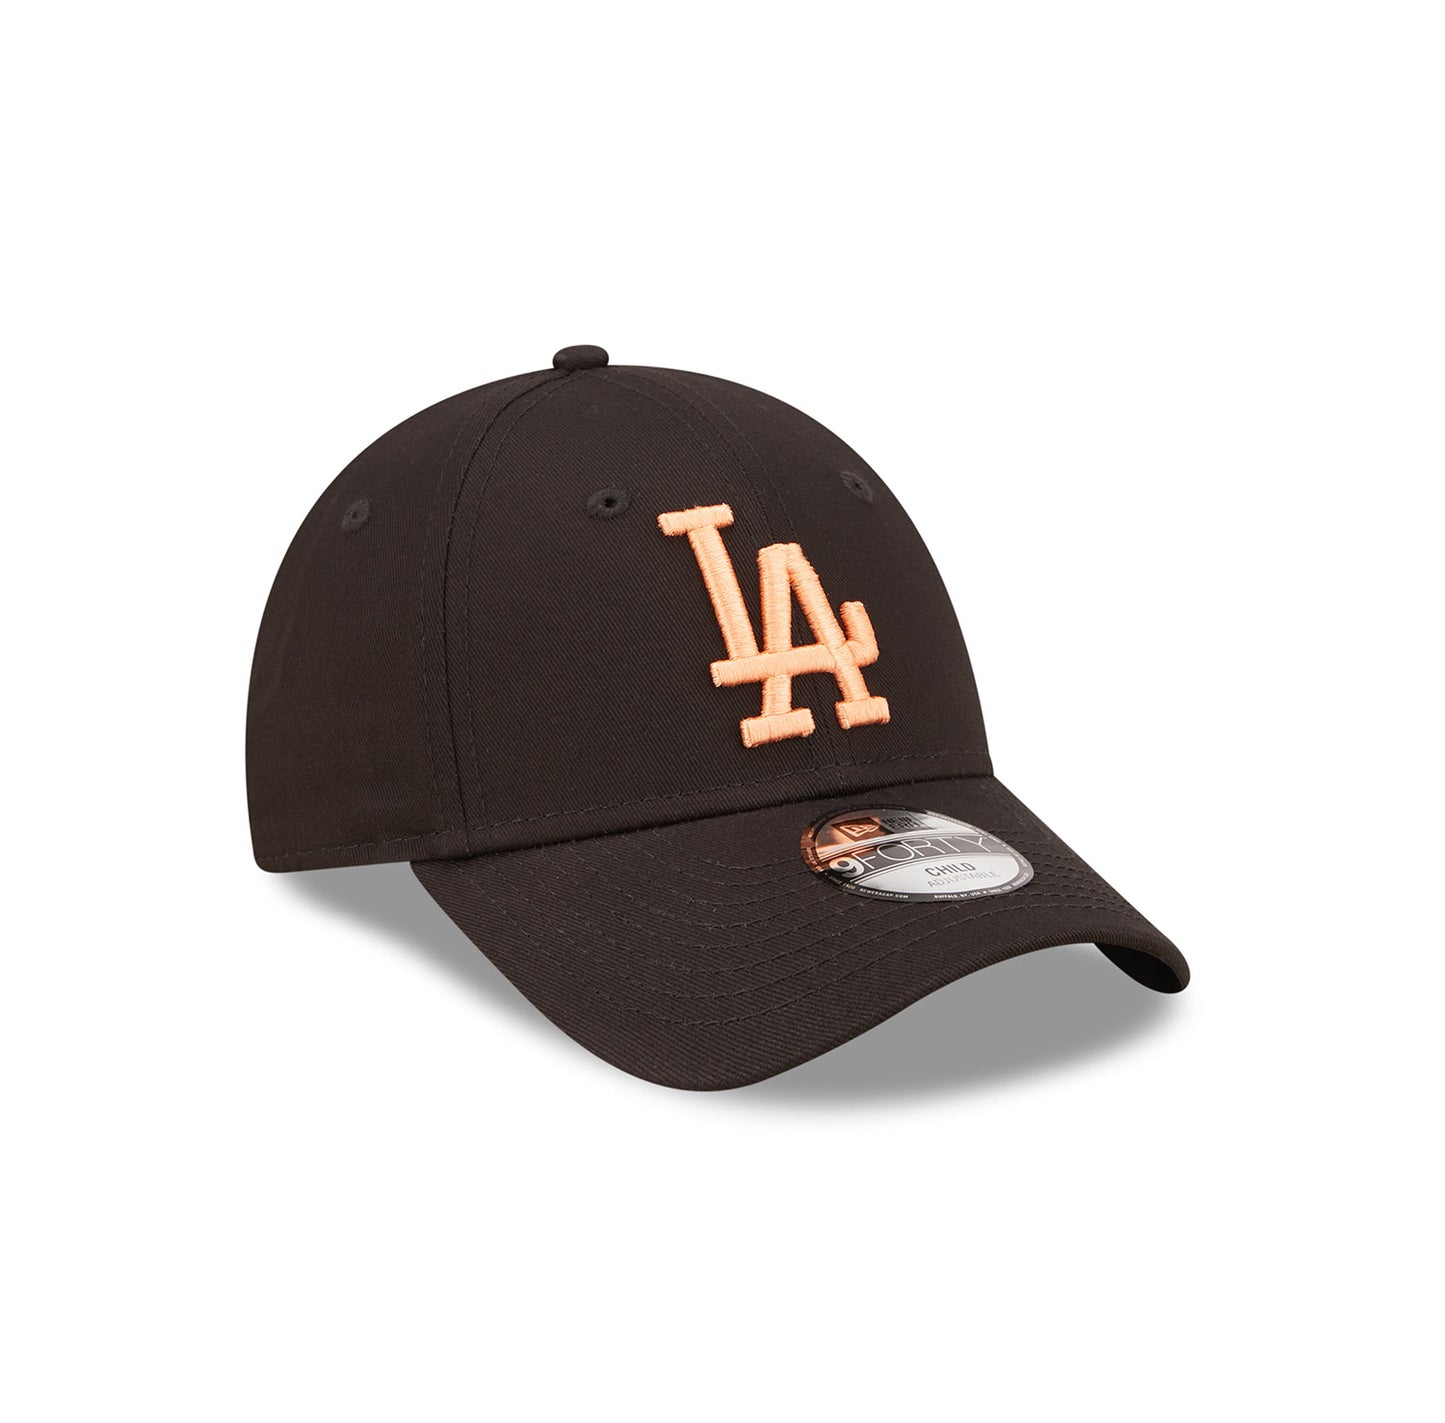 Los Angeles Dodgers New Era 9FORTY YOUTH Strap back Cap black